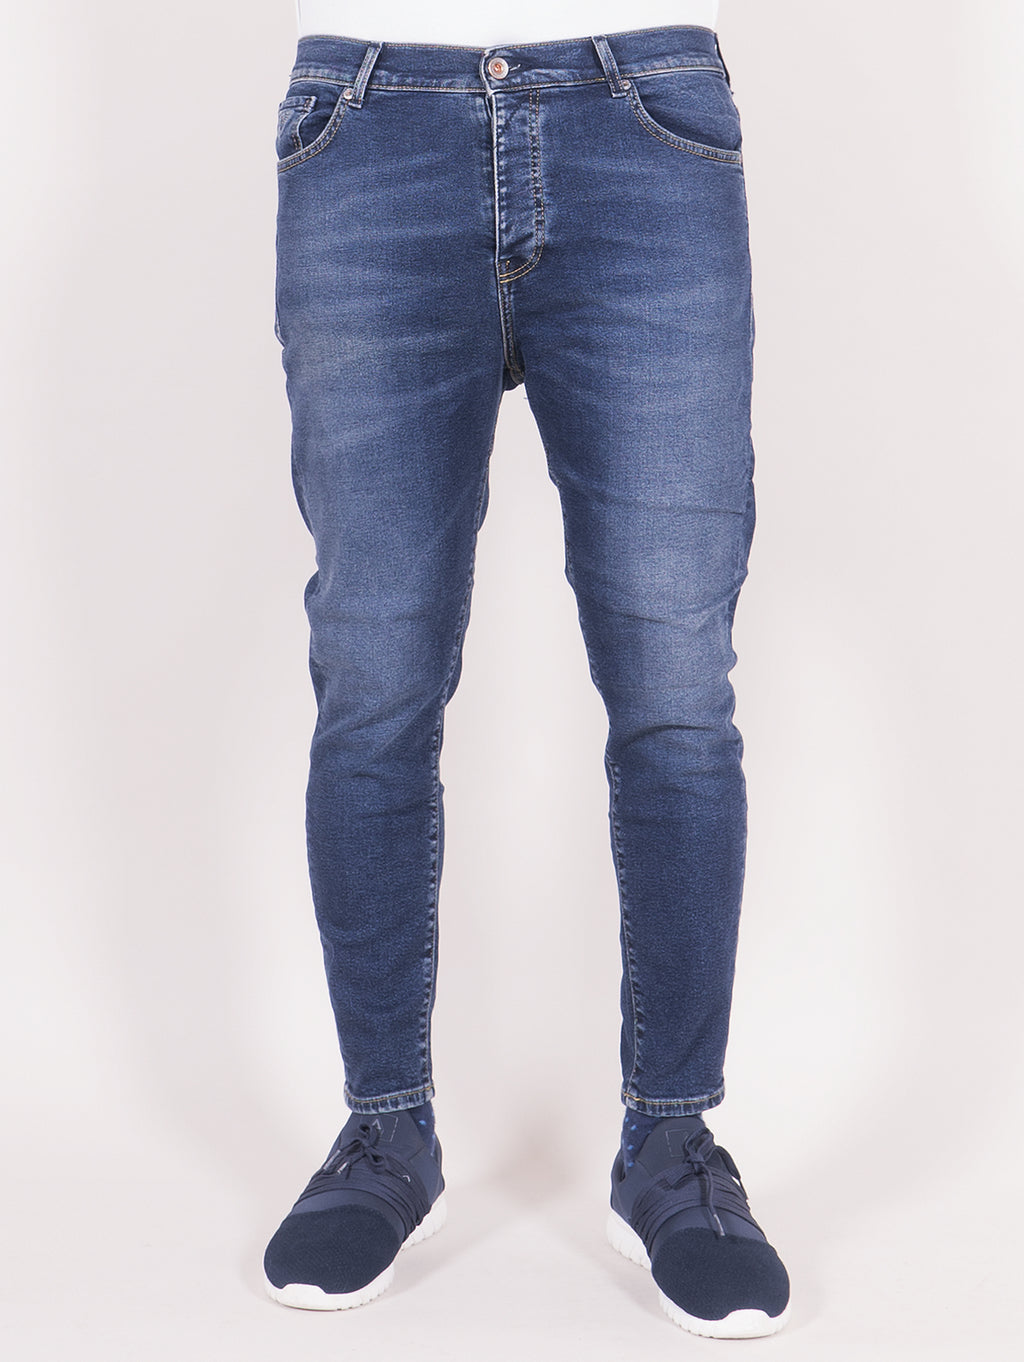 FIFTY FOUR JEANS SKINNY CARROT  -20%